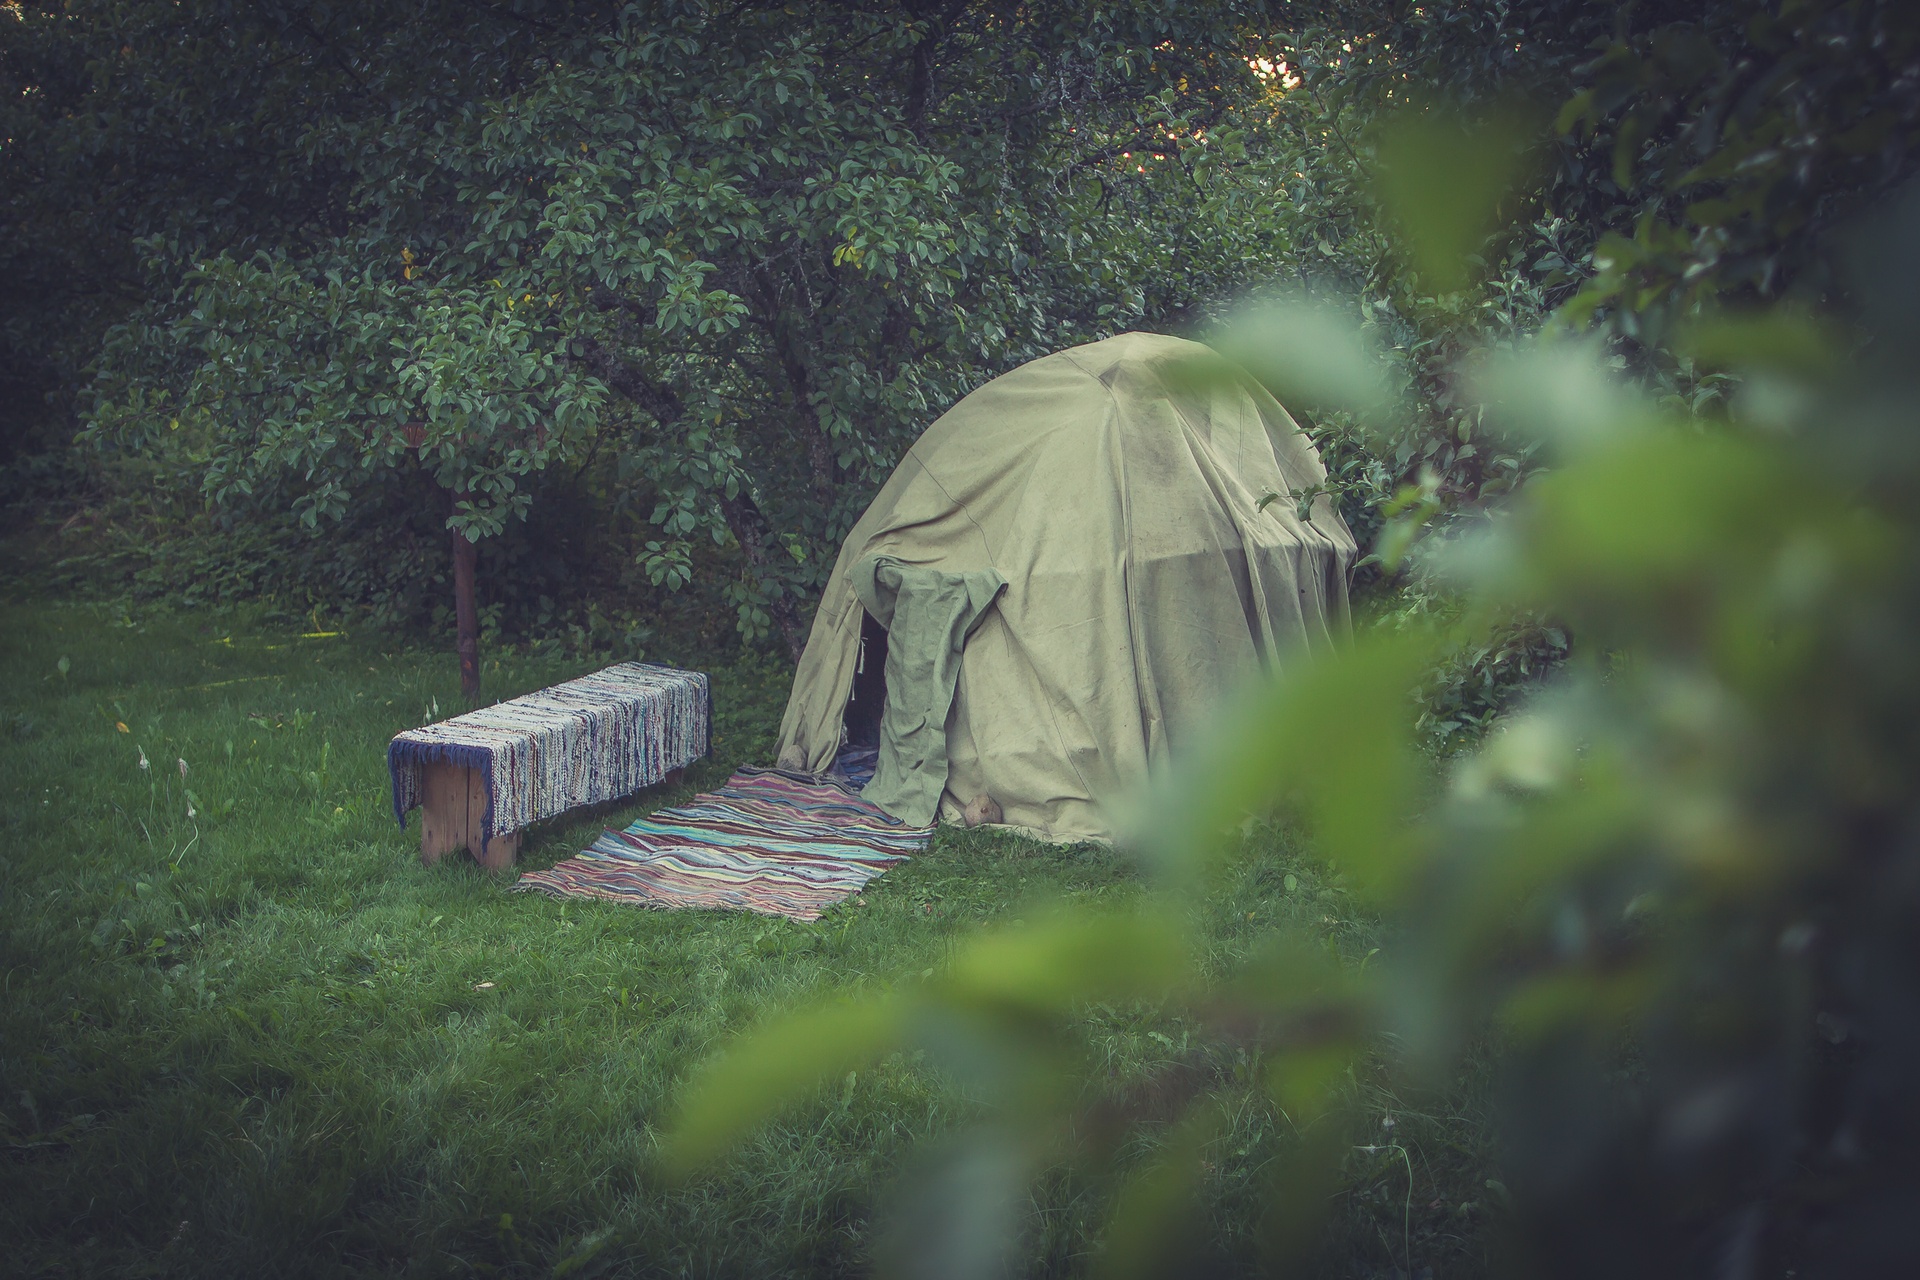 Tent set up amidst summertime greenery in South Estonia